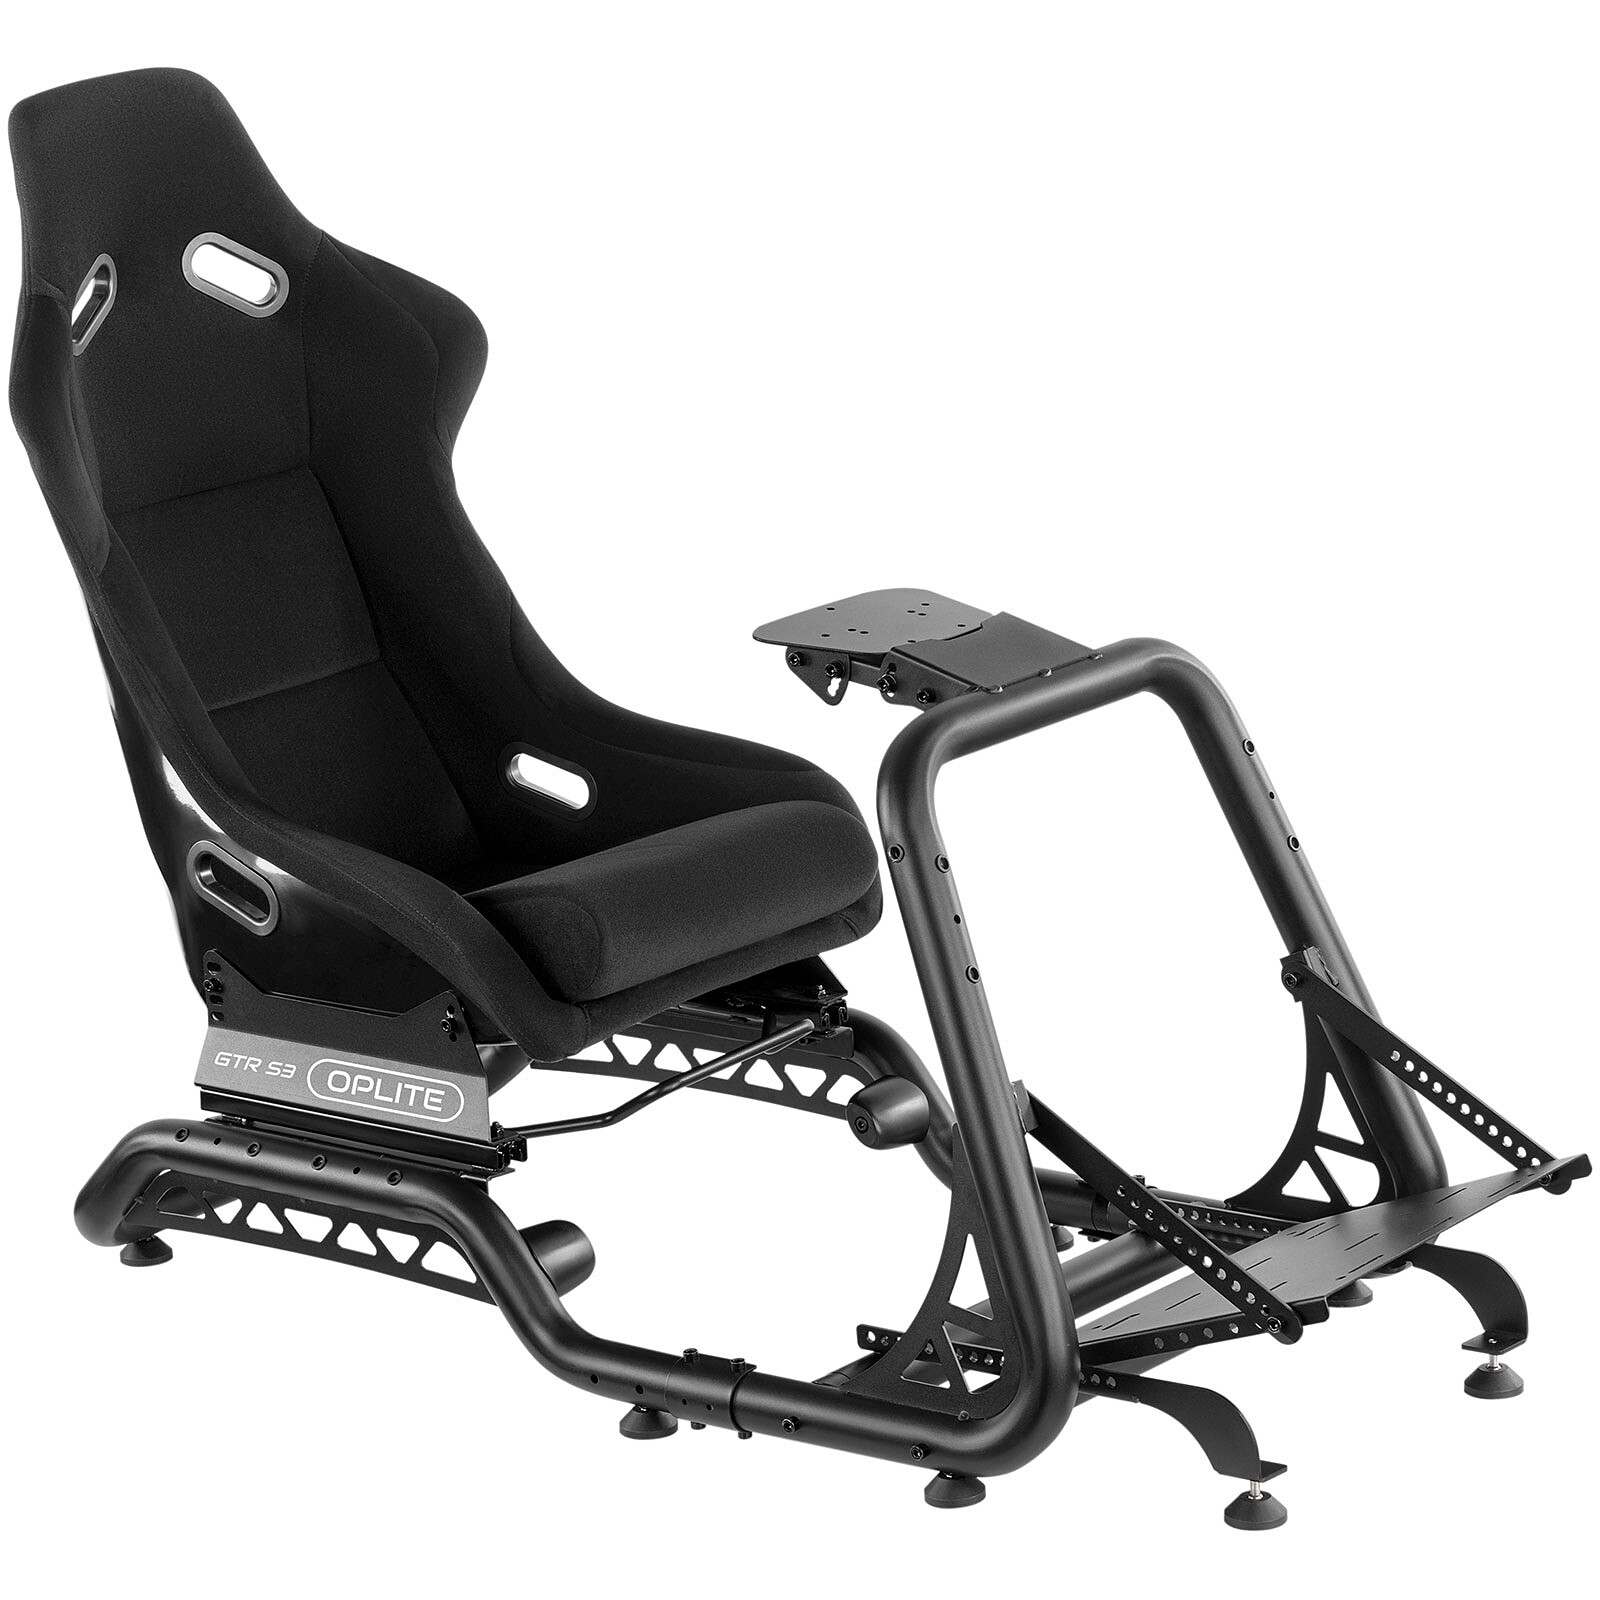 OPLITE GTR Racing Cockpit - Other gaming accessories - LDLC 3-year warranty